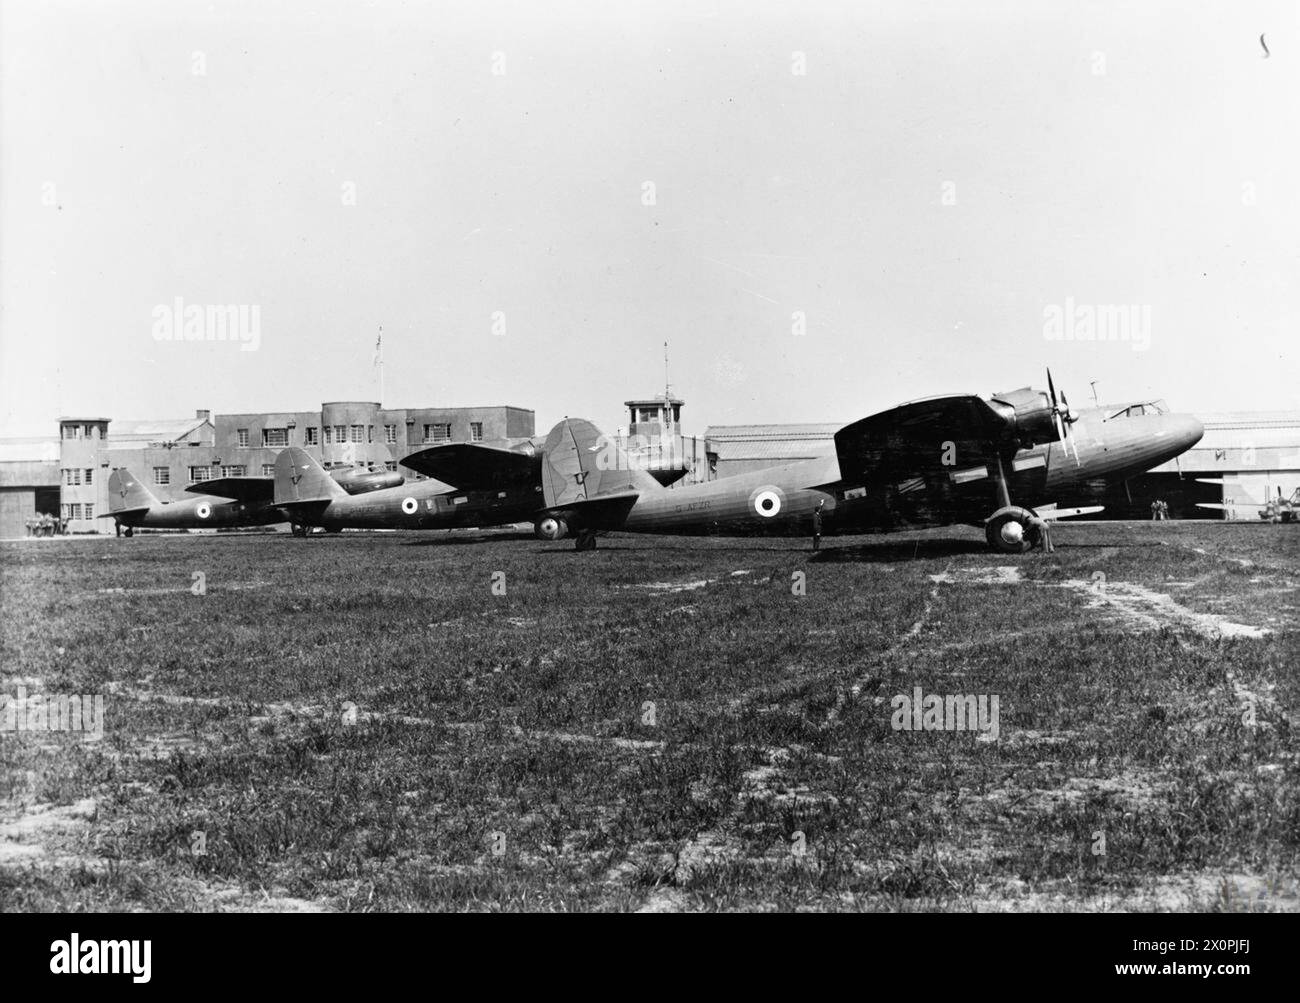 ROYAL AIR FORCE TRAINING COMMAND, 1939-1940. - Fokker F.XXXVI, G-AFZR, and Fokker F.XXIIs, G-AFZP and G-AFXR, of No. 1 Air Observer and Navigation School, parked in front of the airport buildings at Prestwick, Ayrshire. G-AFZR (formerly PH-AJA) was purchased from the Dutch airline KLM by the RAF in 1939. It was flown and maintained by Scottish Aviation Ltd, Prestwick, under its civil registration, and served alongside the F.XXIIs as a navigational trainer, initially with No. 12 Elementary Flying Training School, followed by 1 AONS. On 21 May 1940, G-AFZR crashed on take off from Prestwick Roya Stock Photo